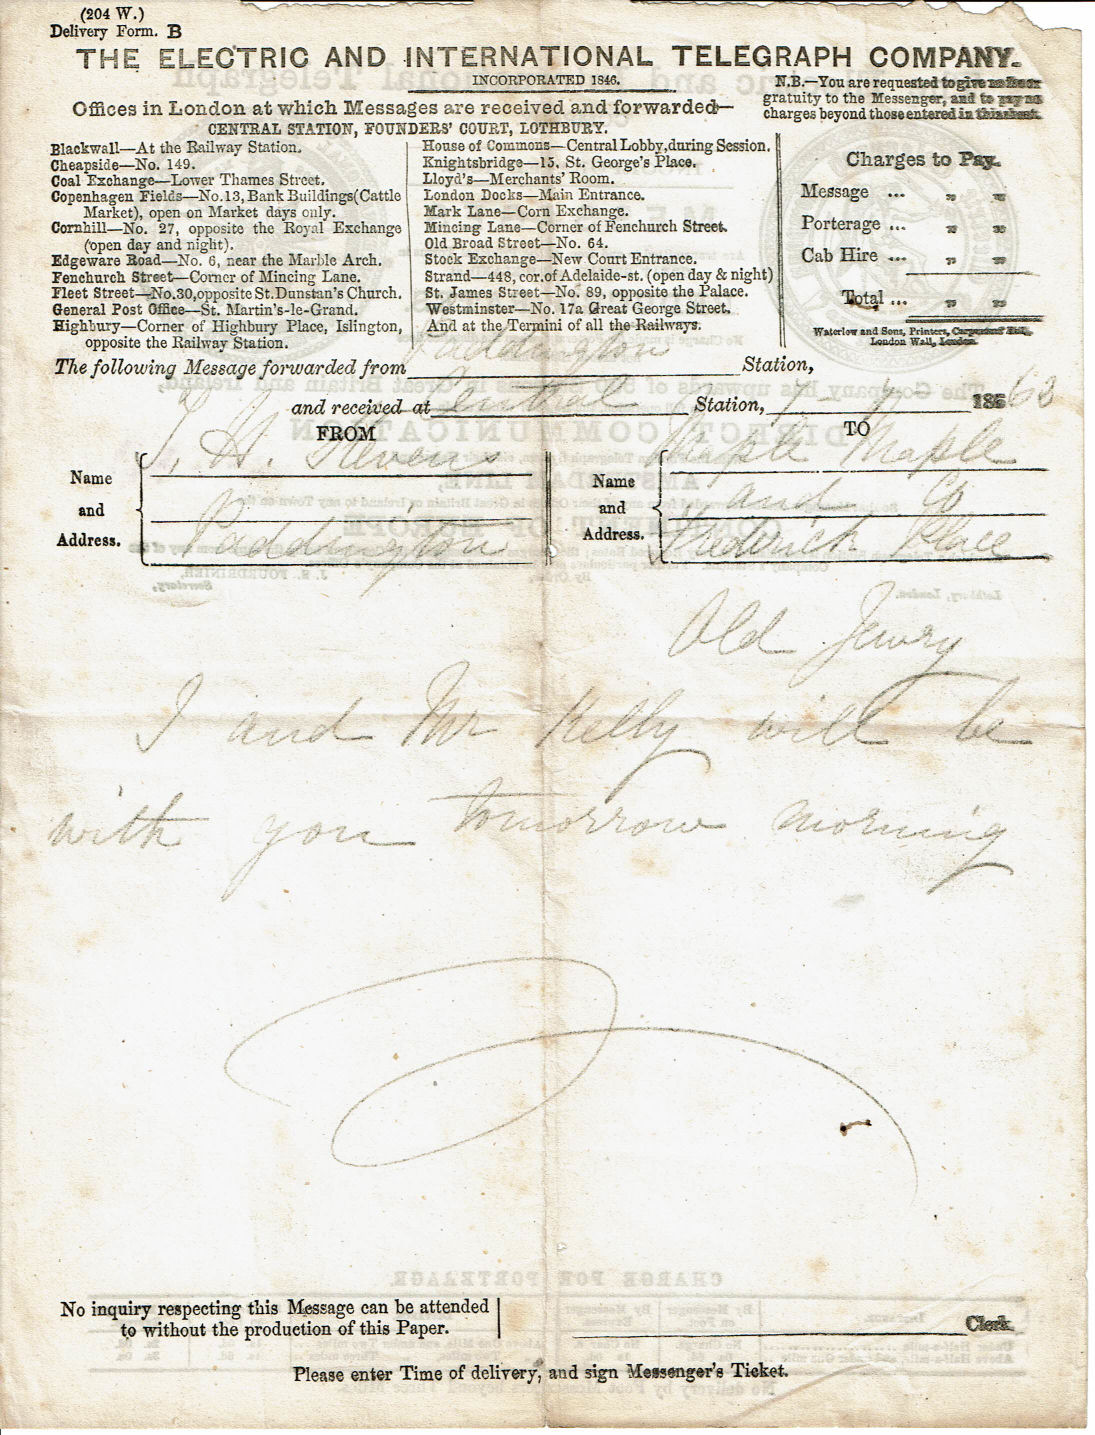 Electric Telegraph Company Form B - front.